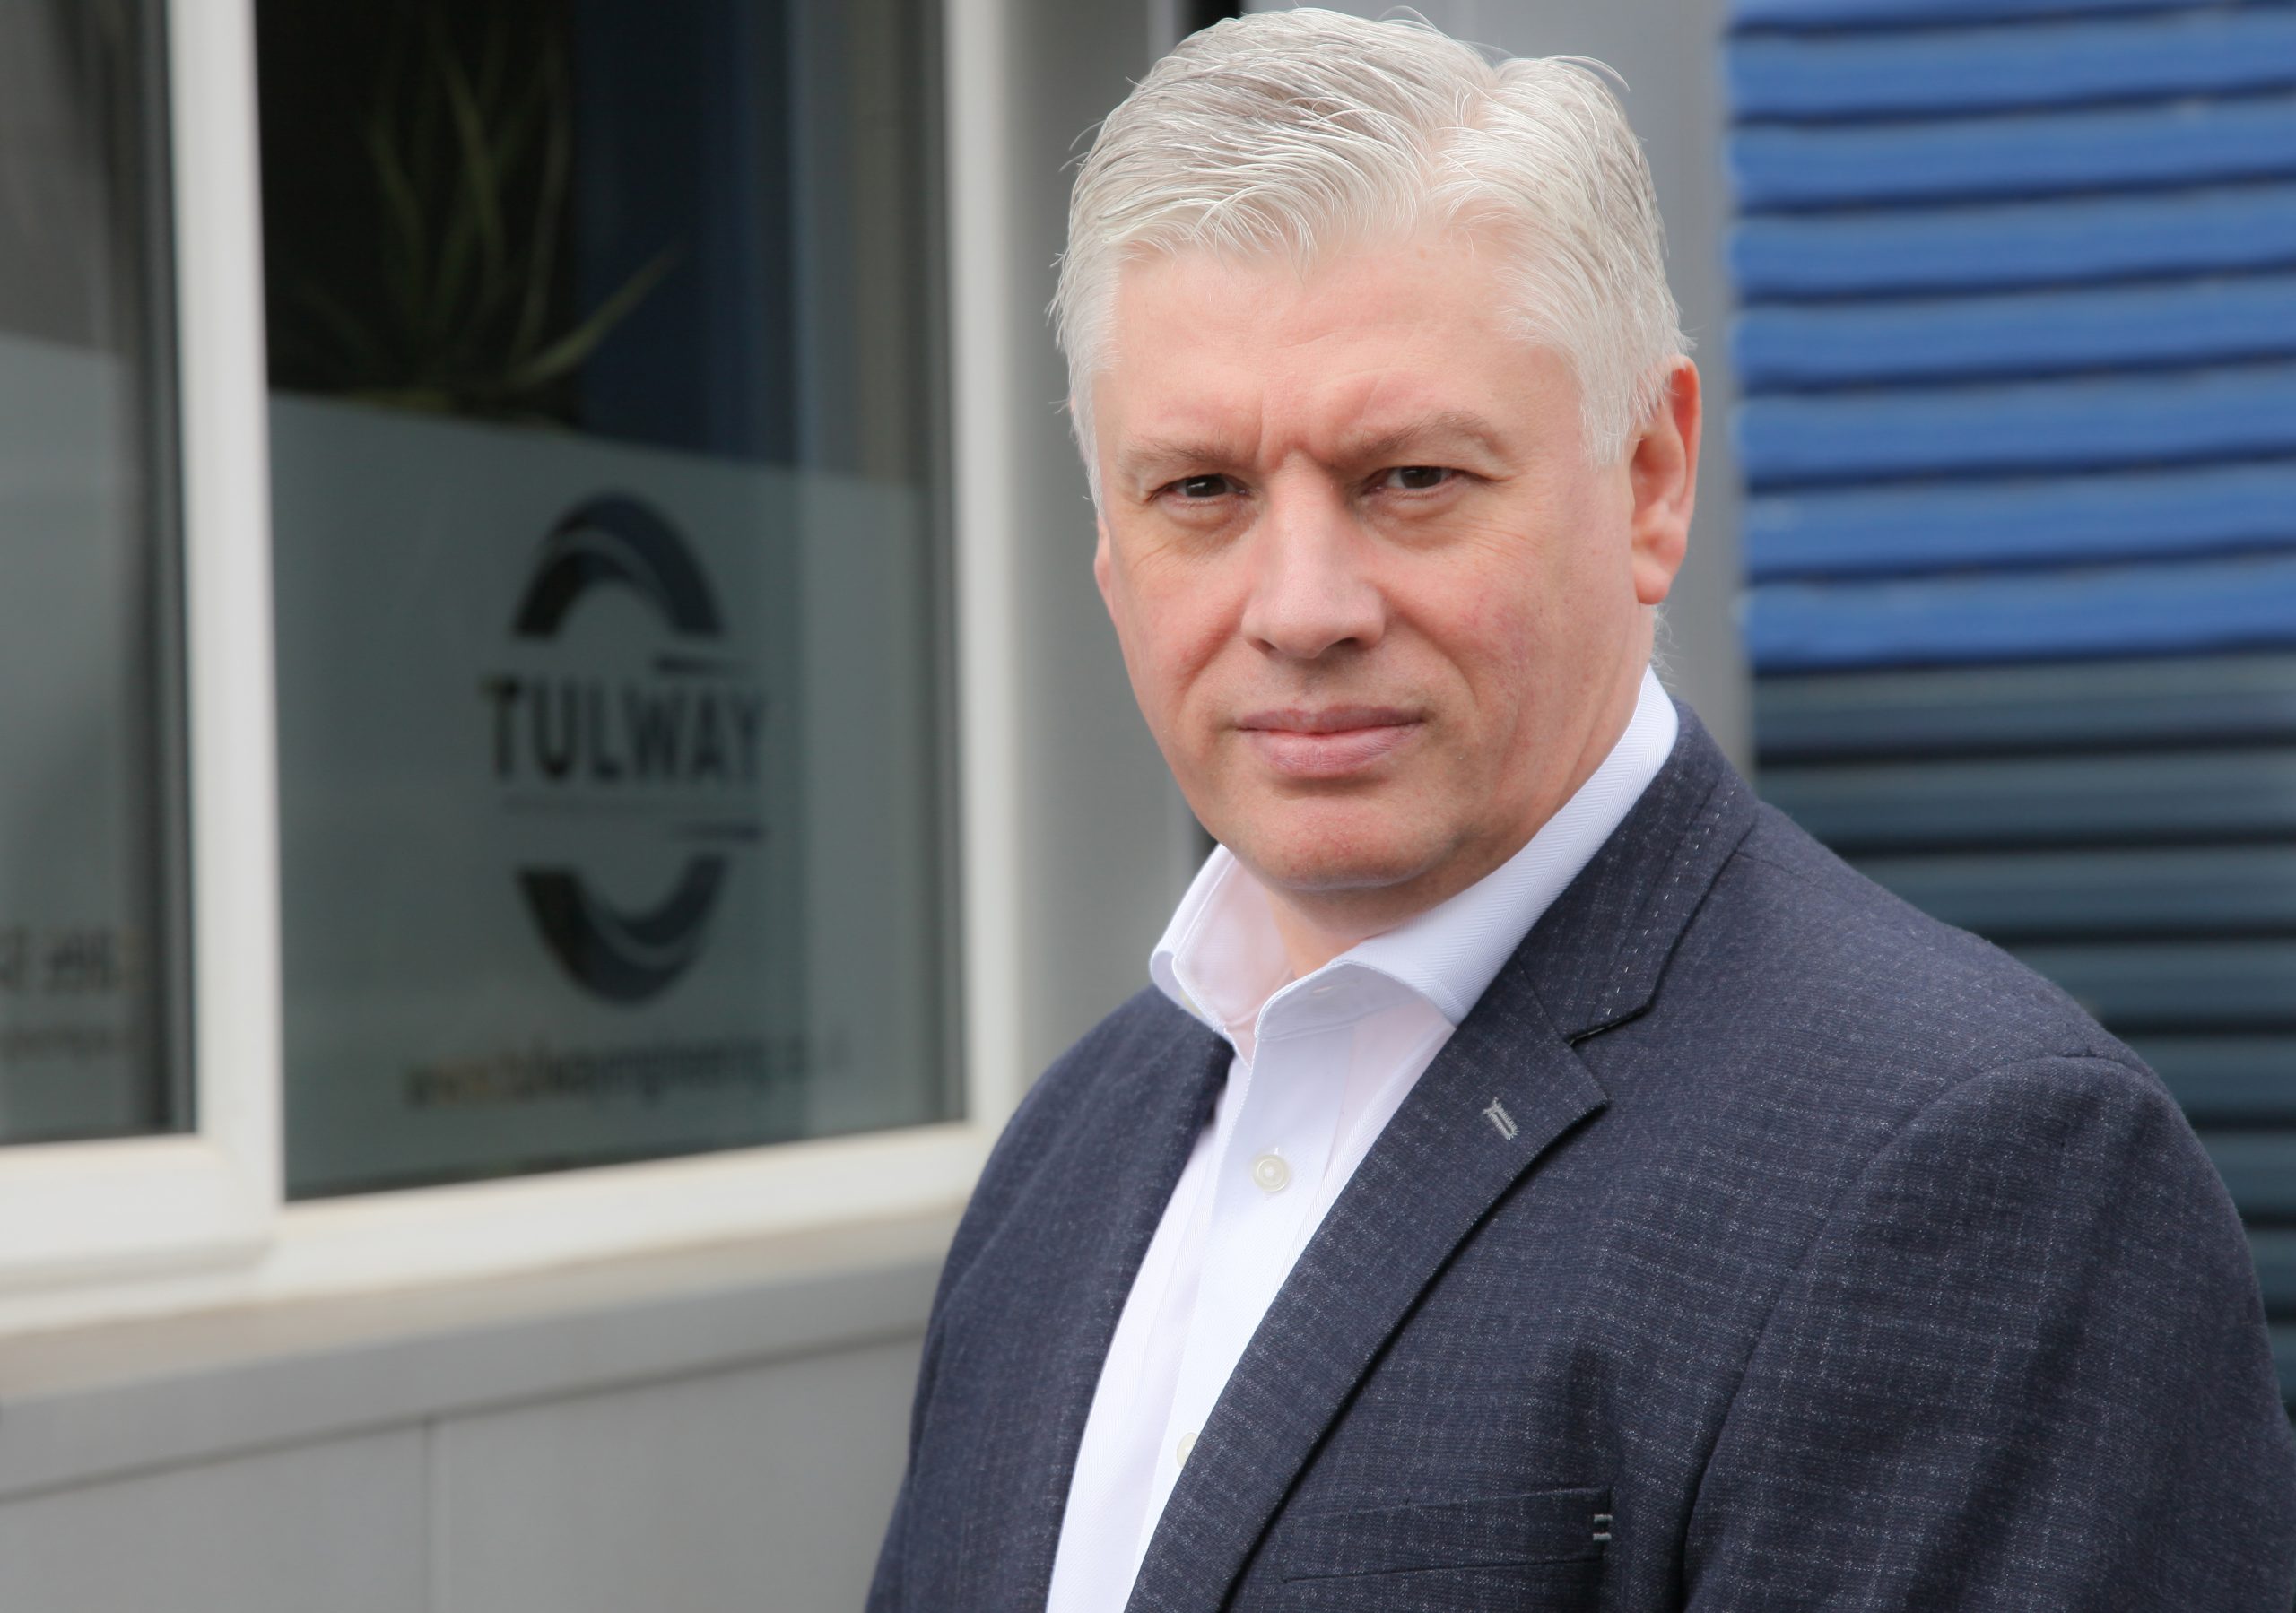 MD of Tulway, Kevin Tully